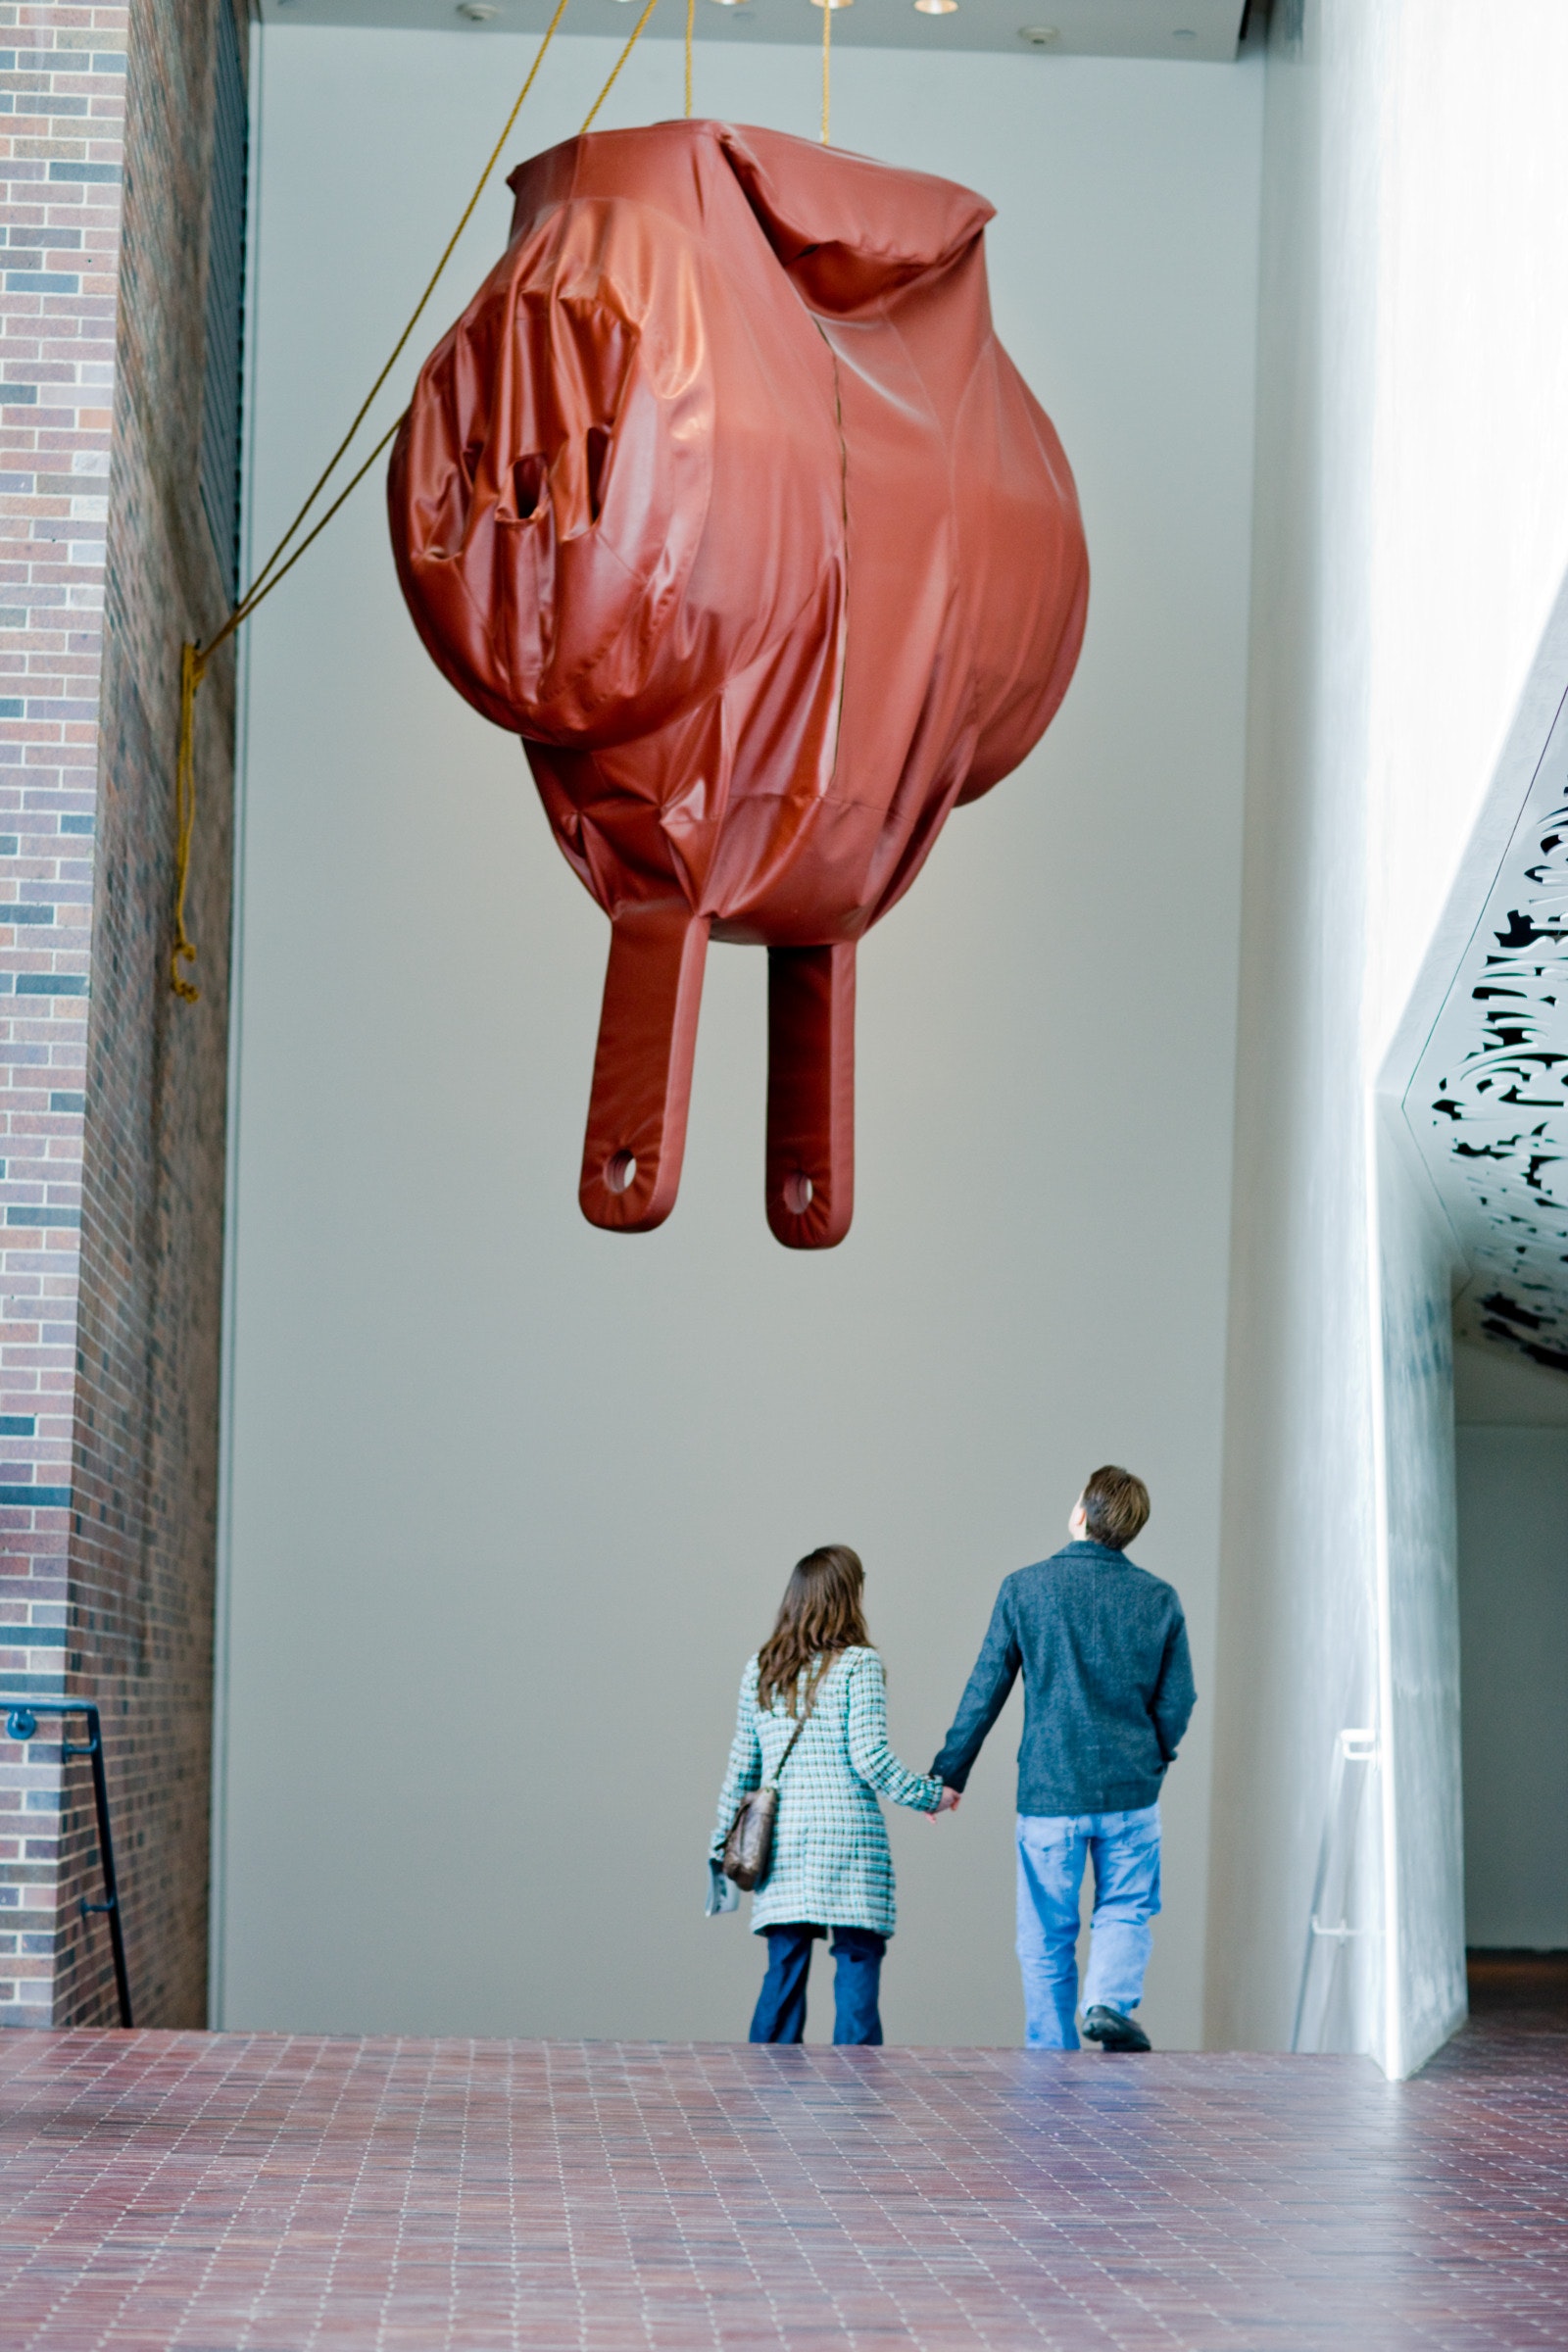 A couple holds hands while looking at a large soft sculpture of a three way electrical plug in a museum stairwell.